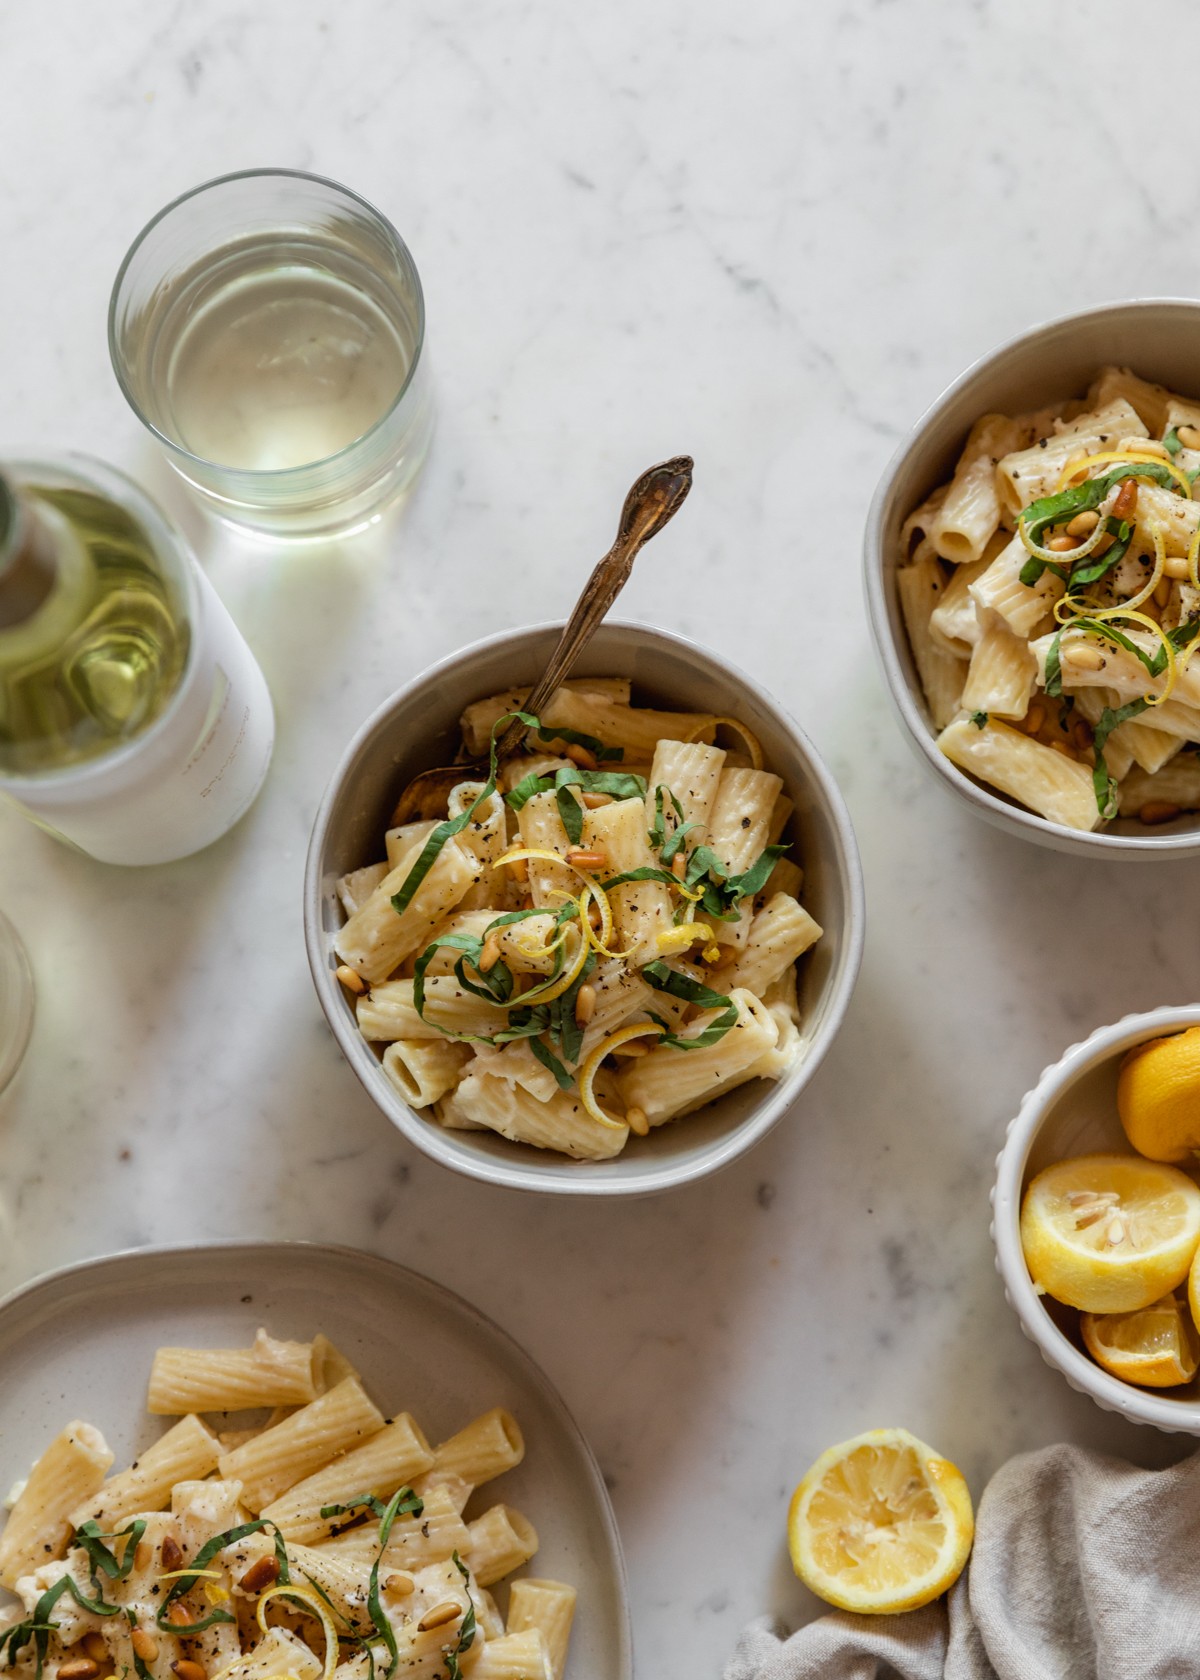 An overhead image of two bowls and a plate filled with creamy lemon pasta on a marble counter next to a bottle of white wine, a bowl of lemons, and a tan linen.